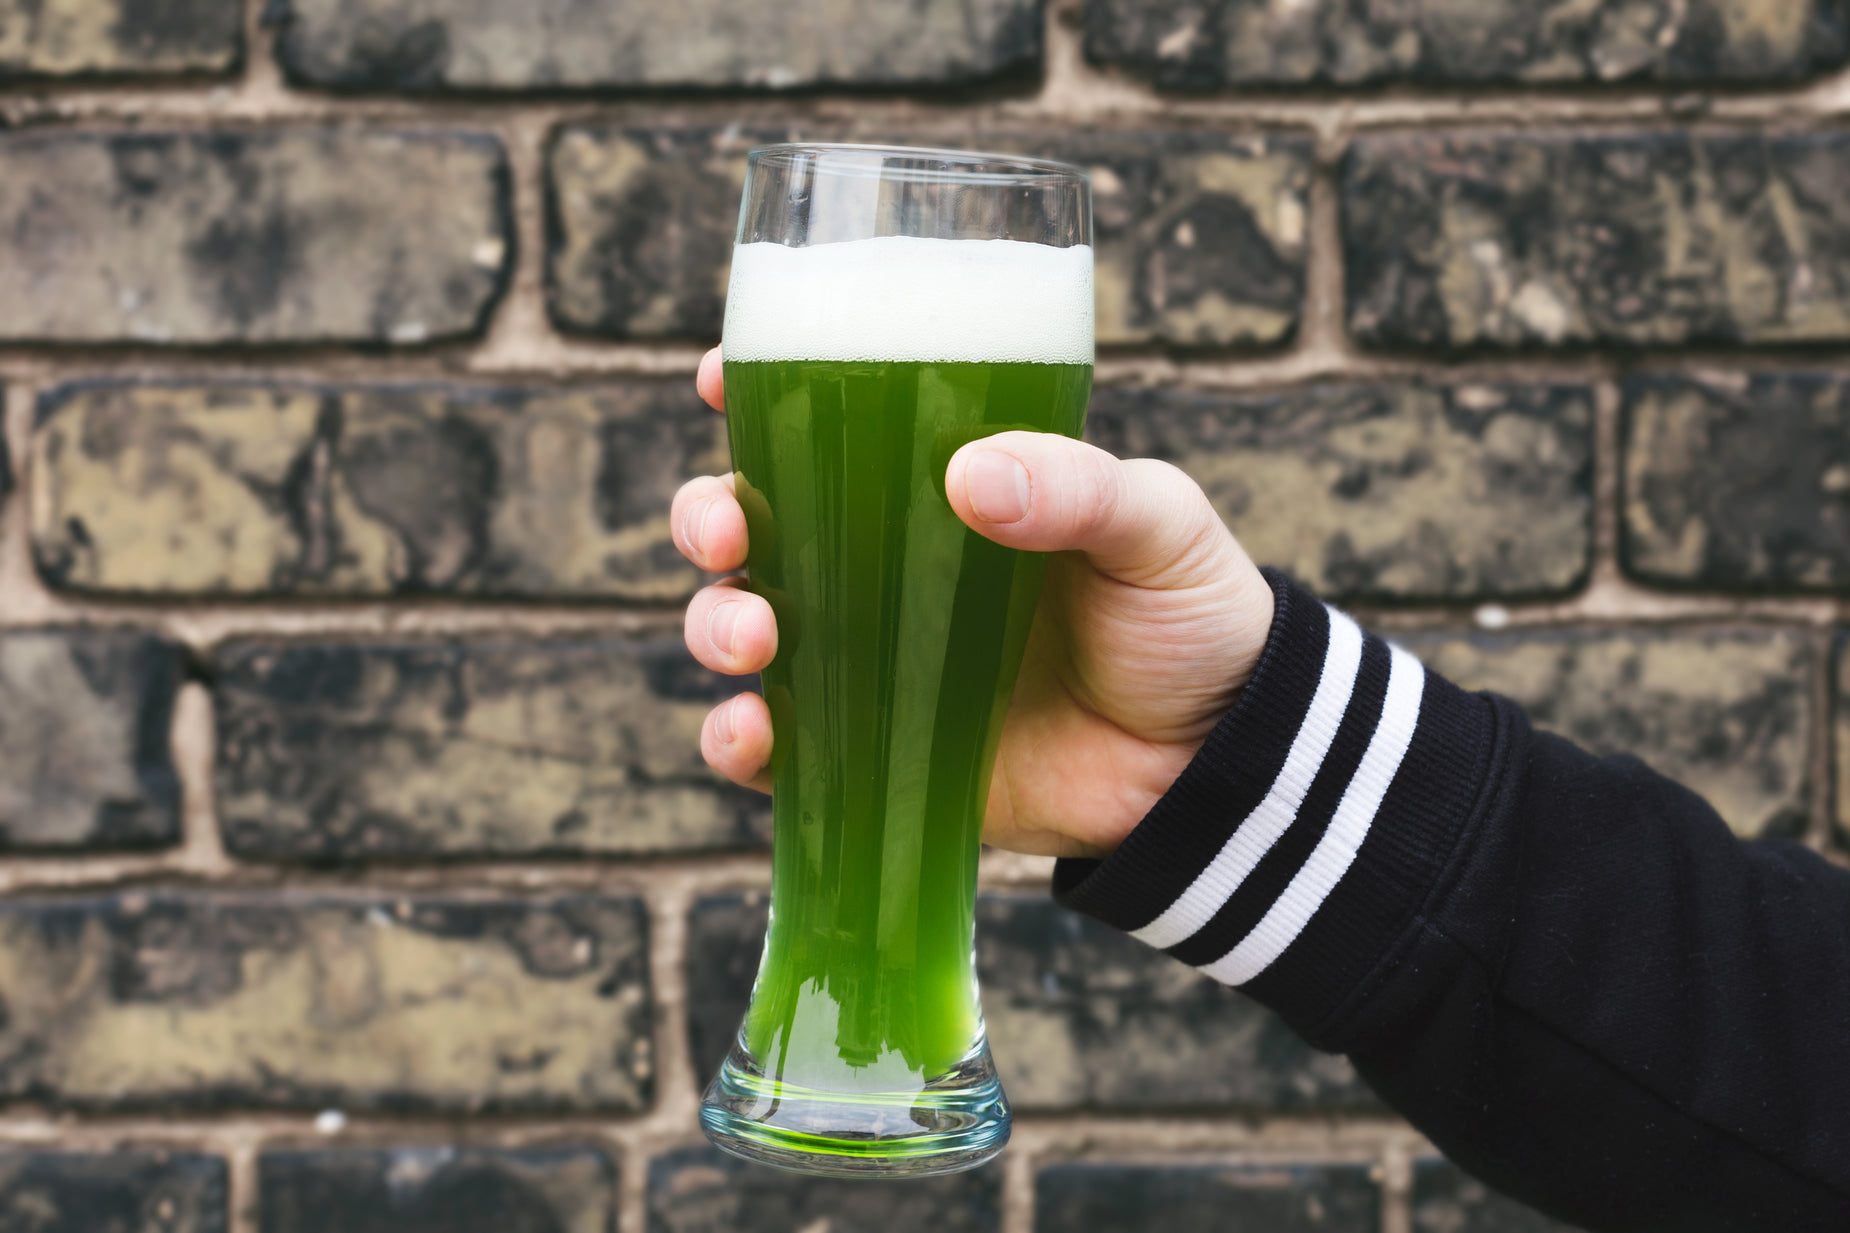 a man holds a glass filled with green liquid